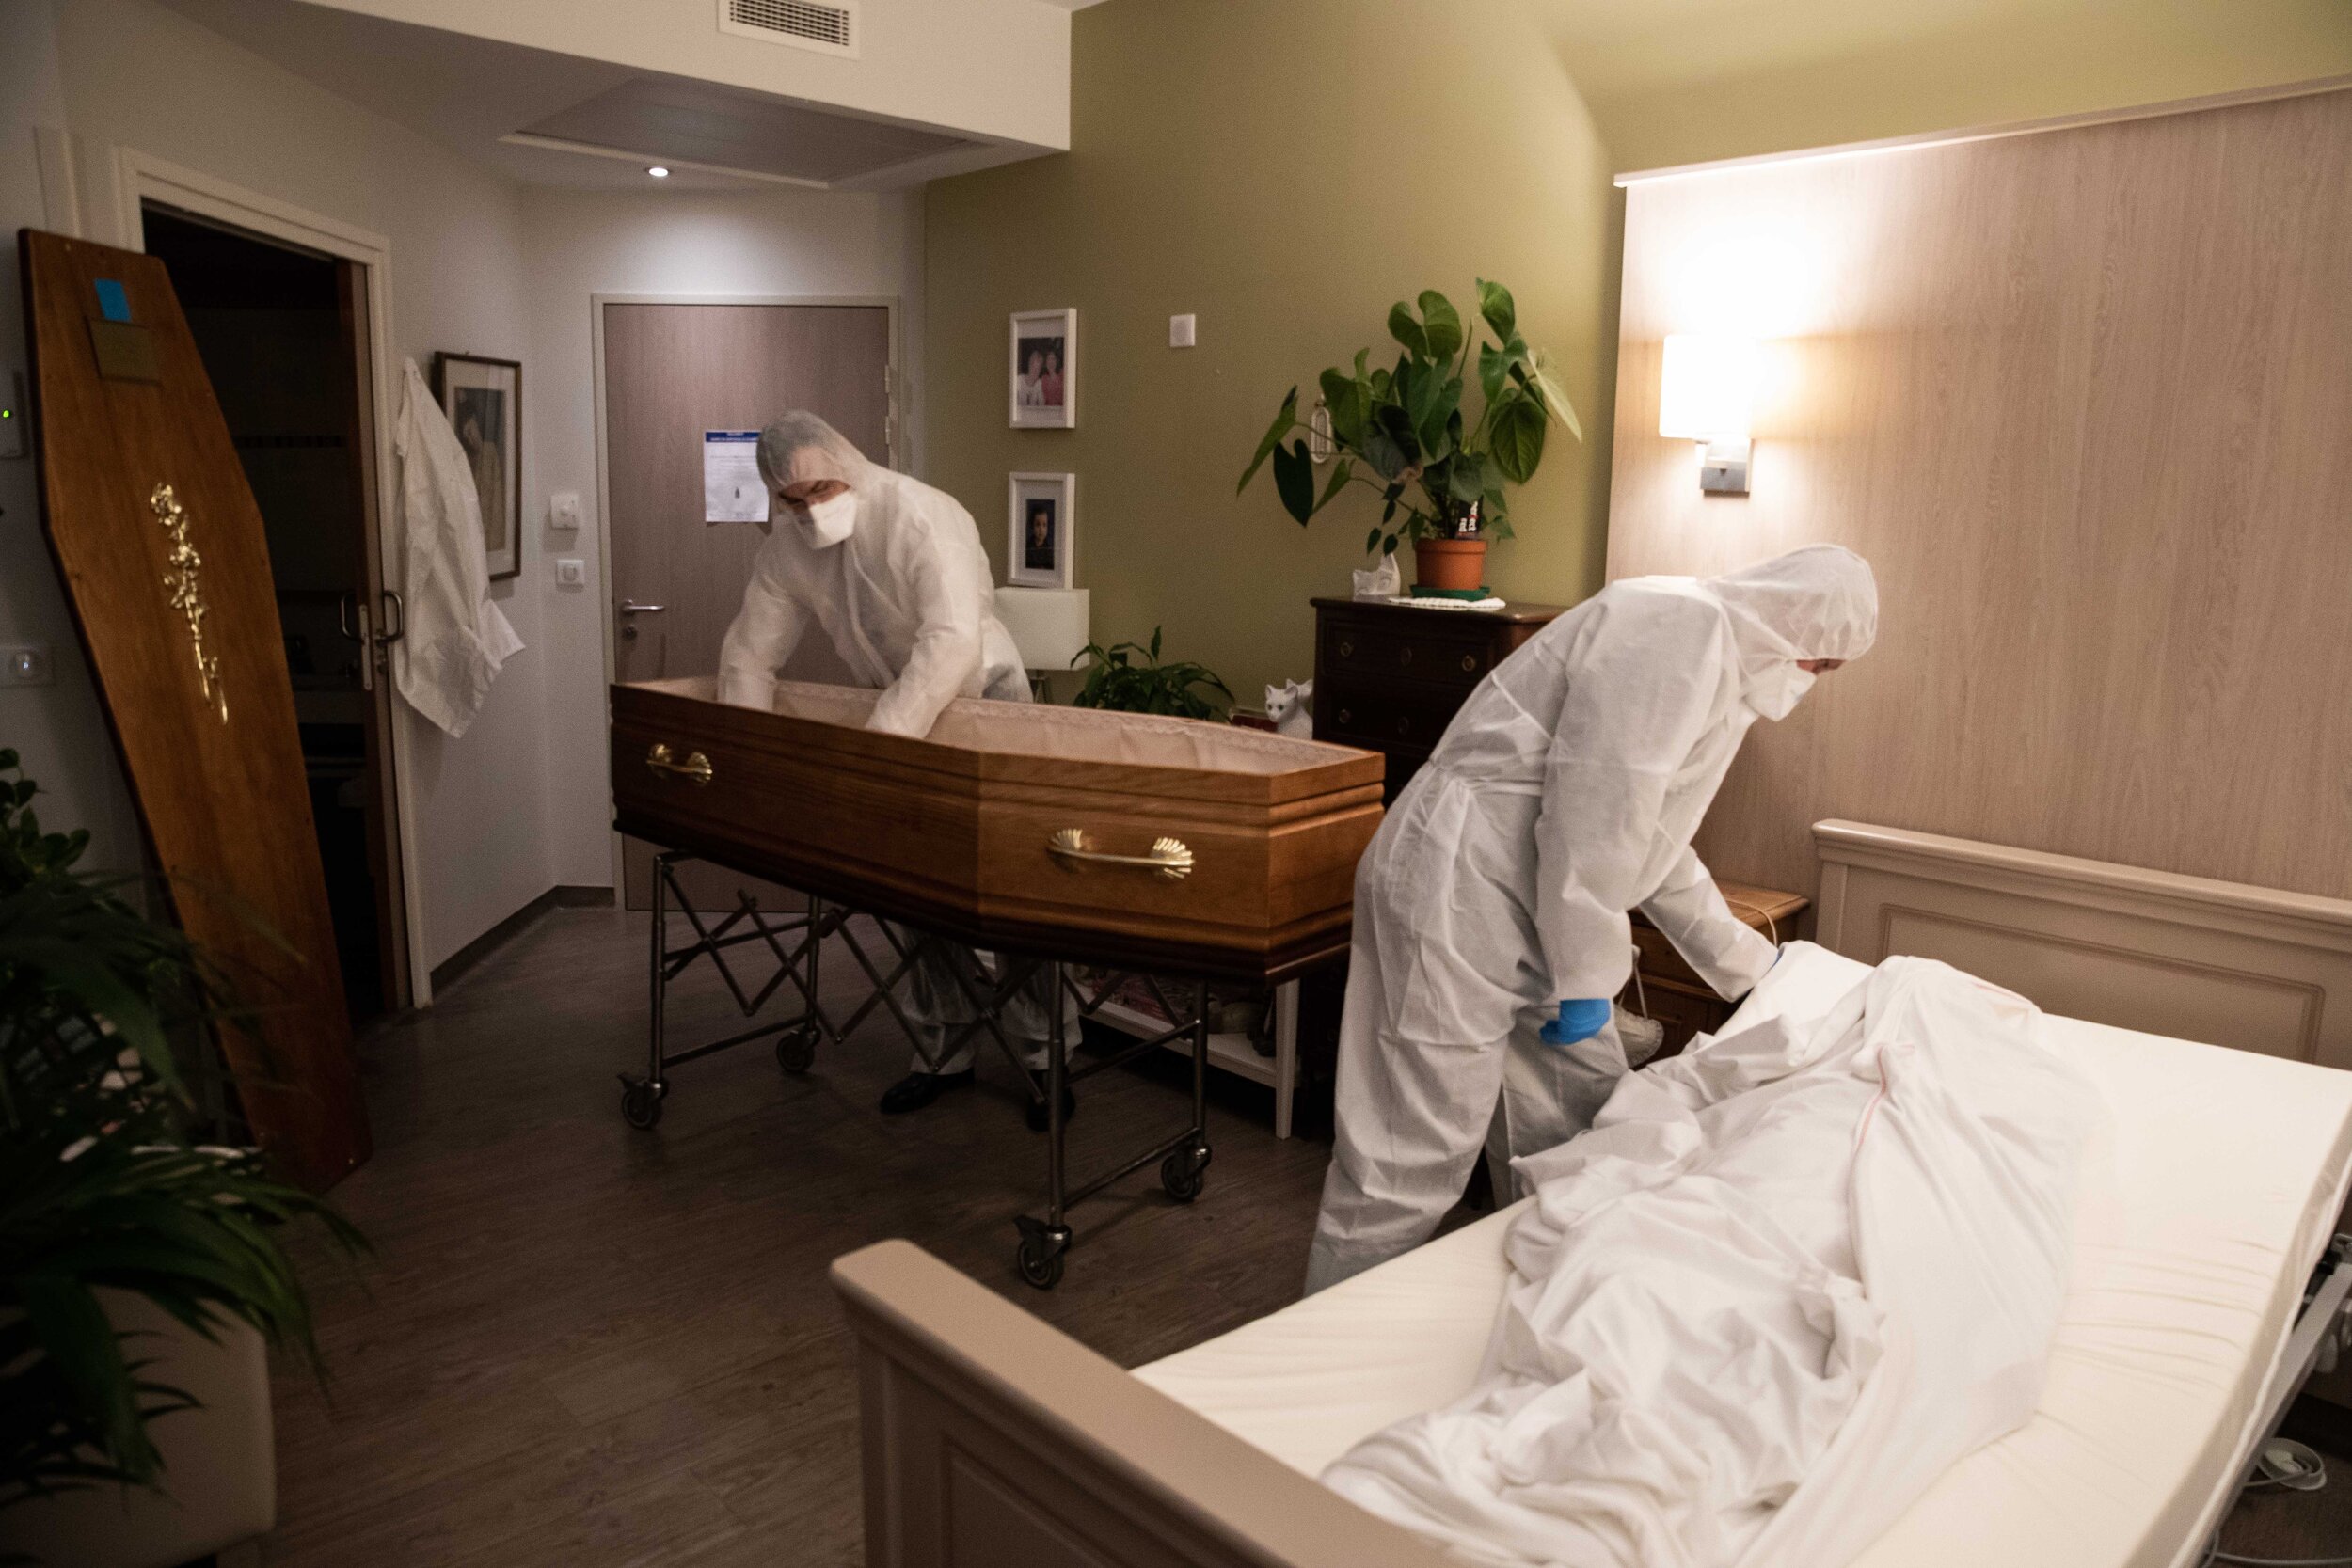   © Alexis Sciard / IP3; Paris, France, April 7, 2020  - Report inside the Santilly Funeral Home, which is currently facing the Coronavirus epidemic (Covid-19) - In the bedroom of a retirement home, two undertakers recover the body of a Coronavirus v